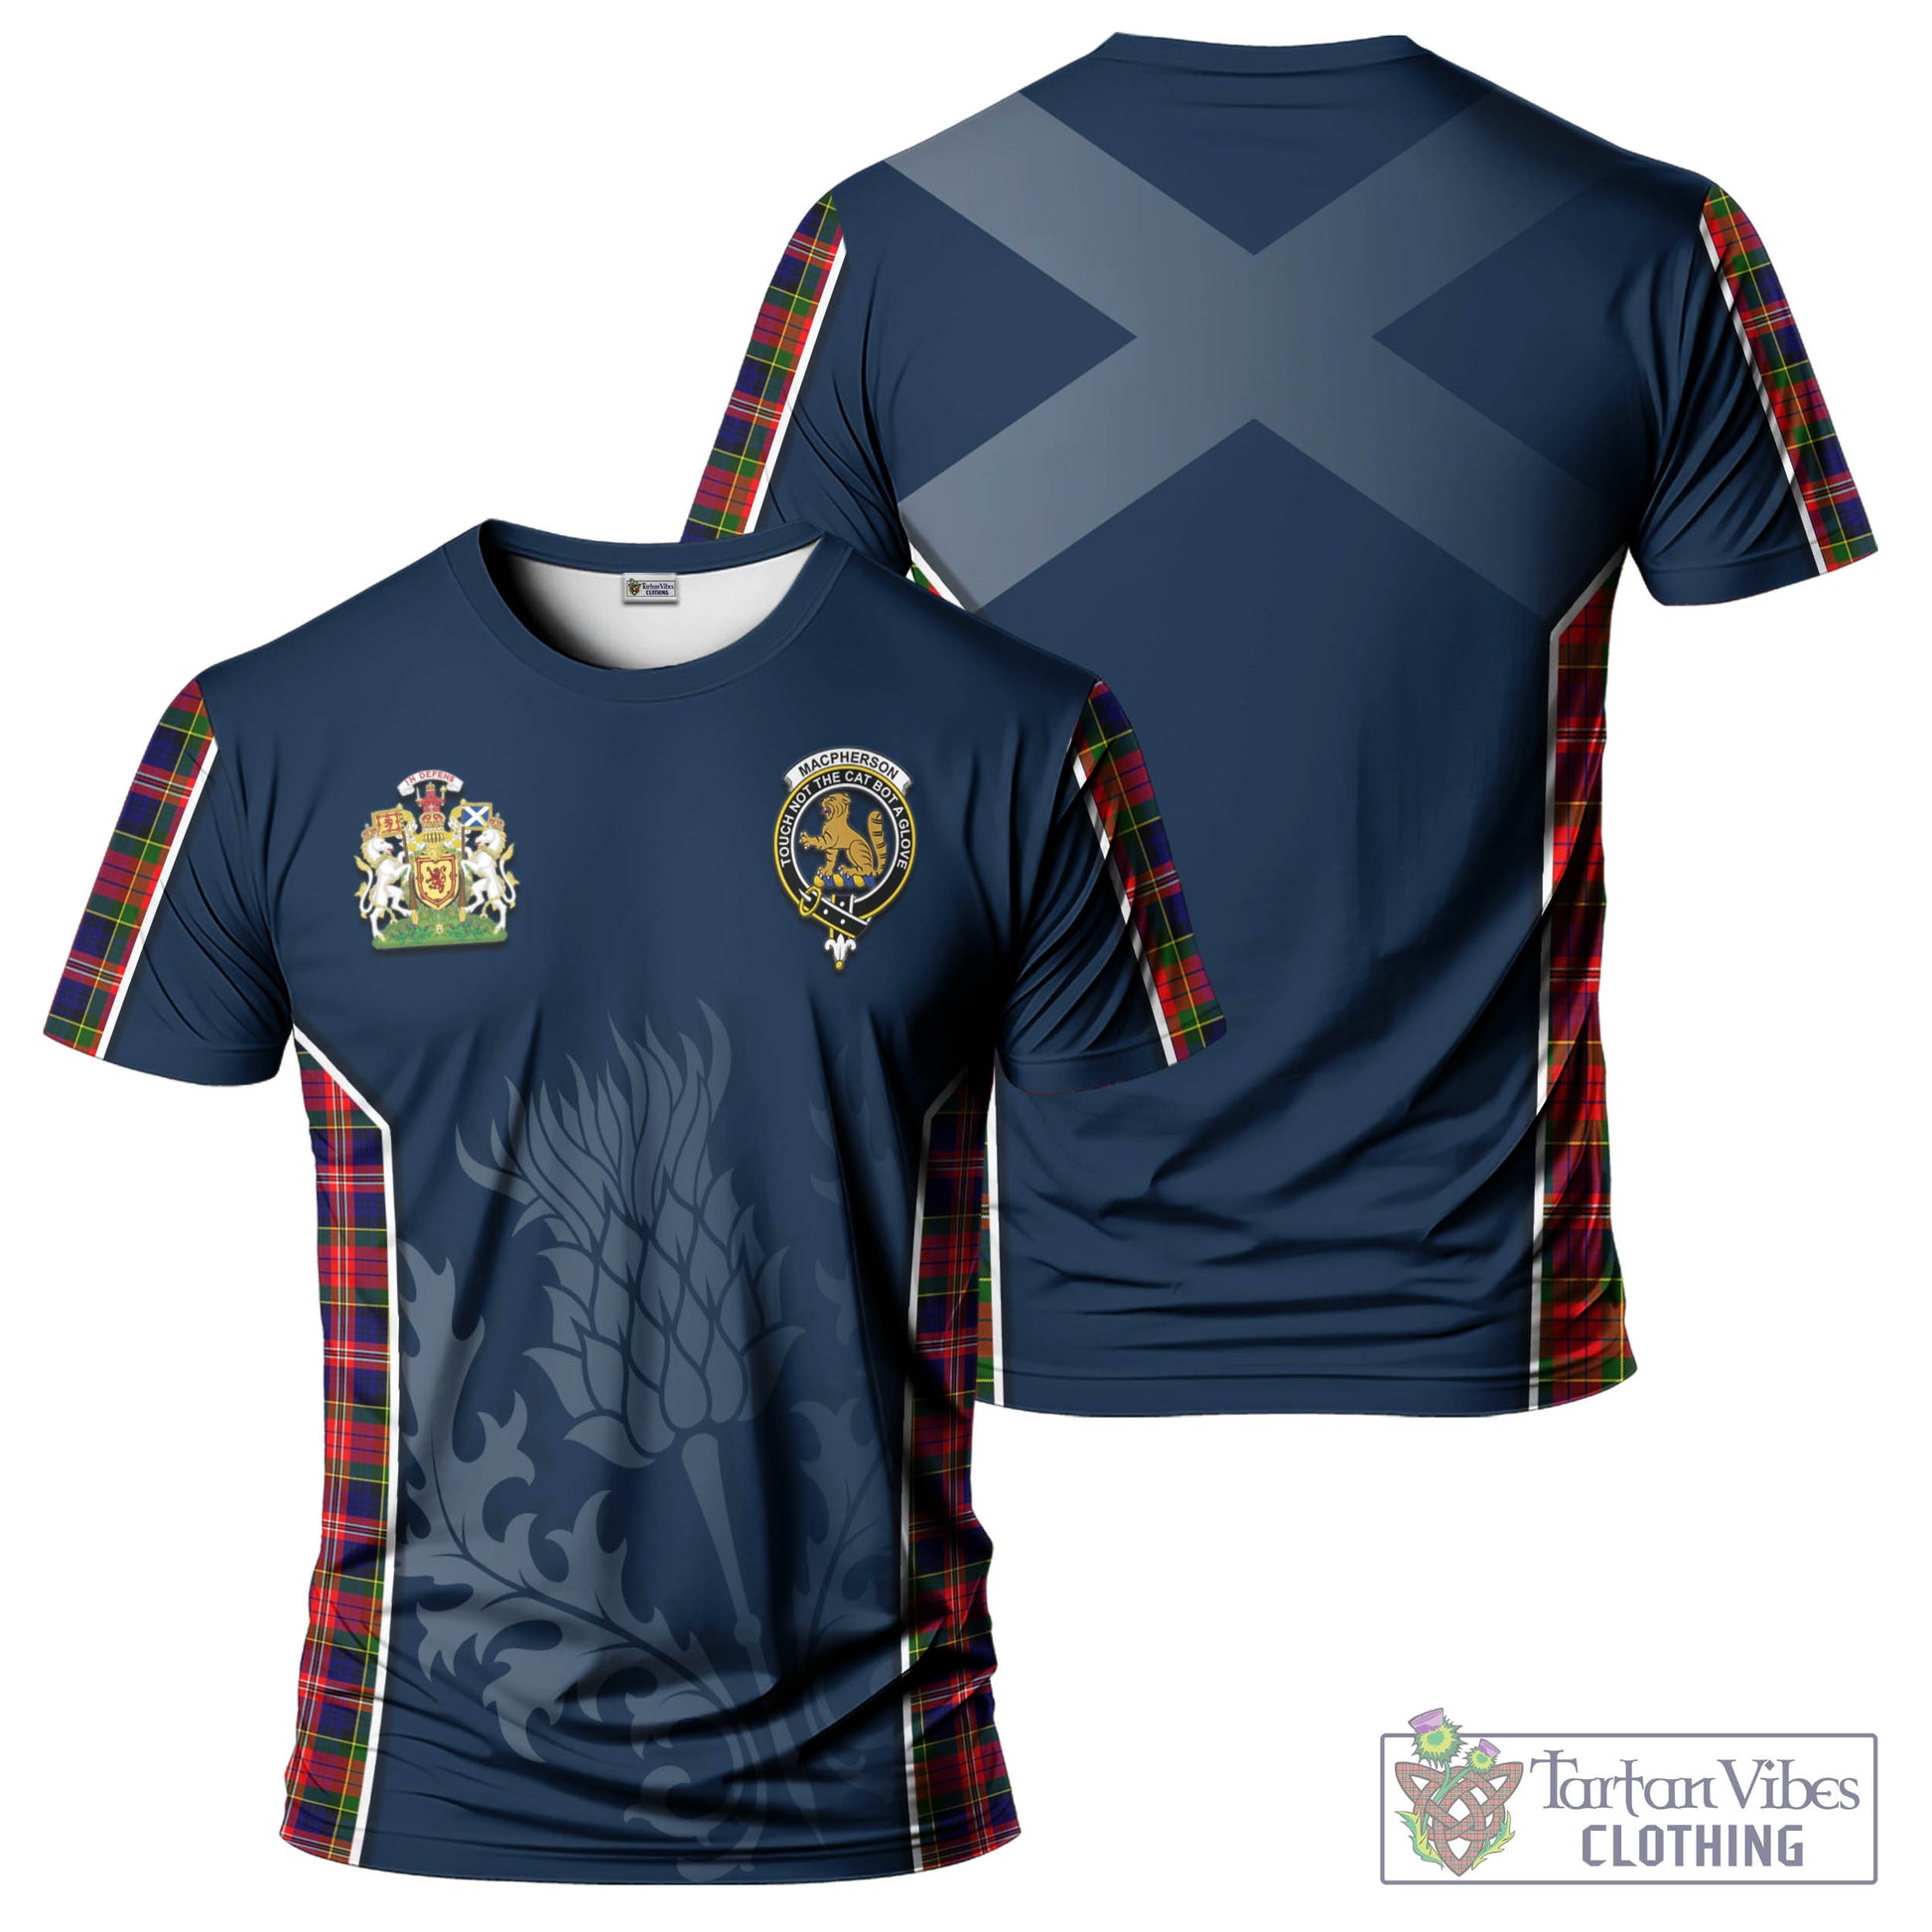 Tartan Vibes Clothing MacPherson Modern Tartan T-Shirt with Family Crest and Scottish Thistle Vibes Sport Style